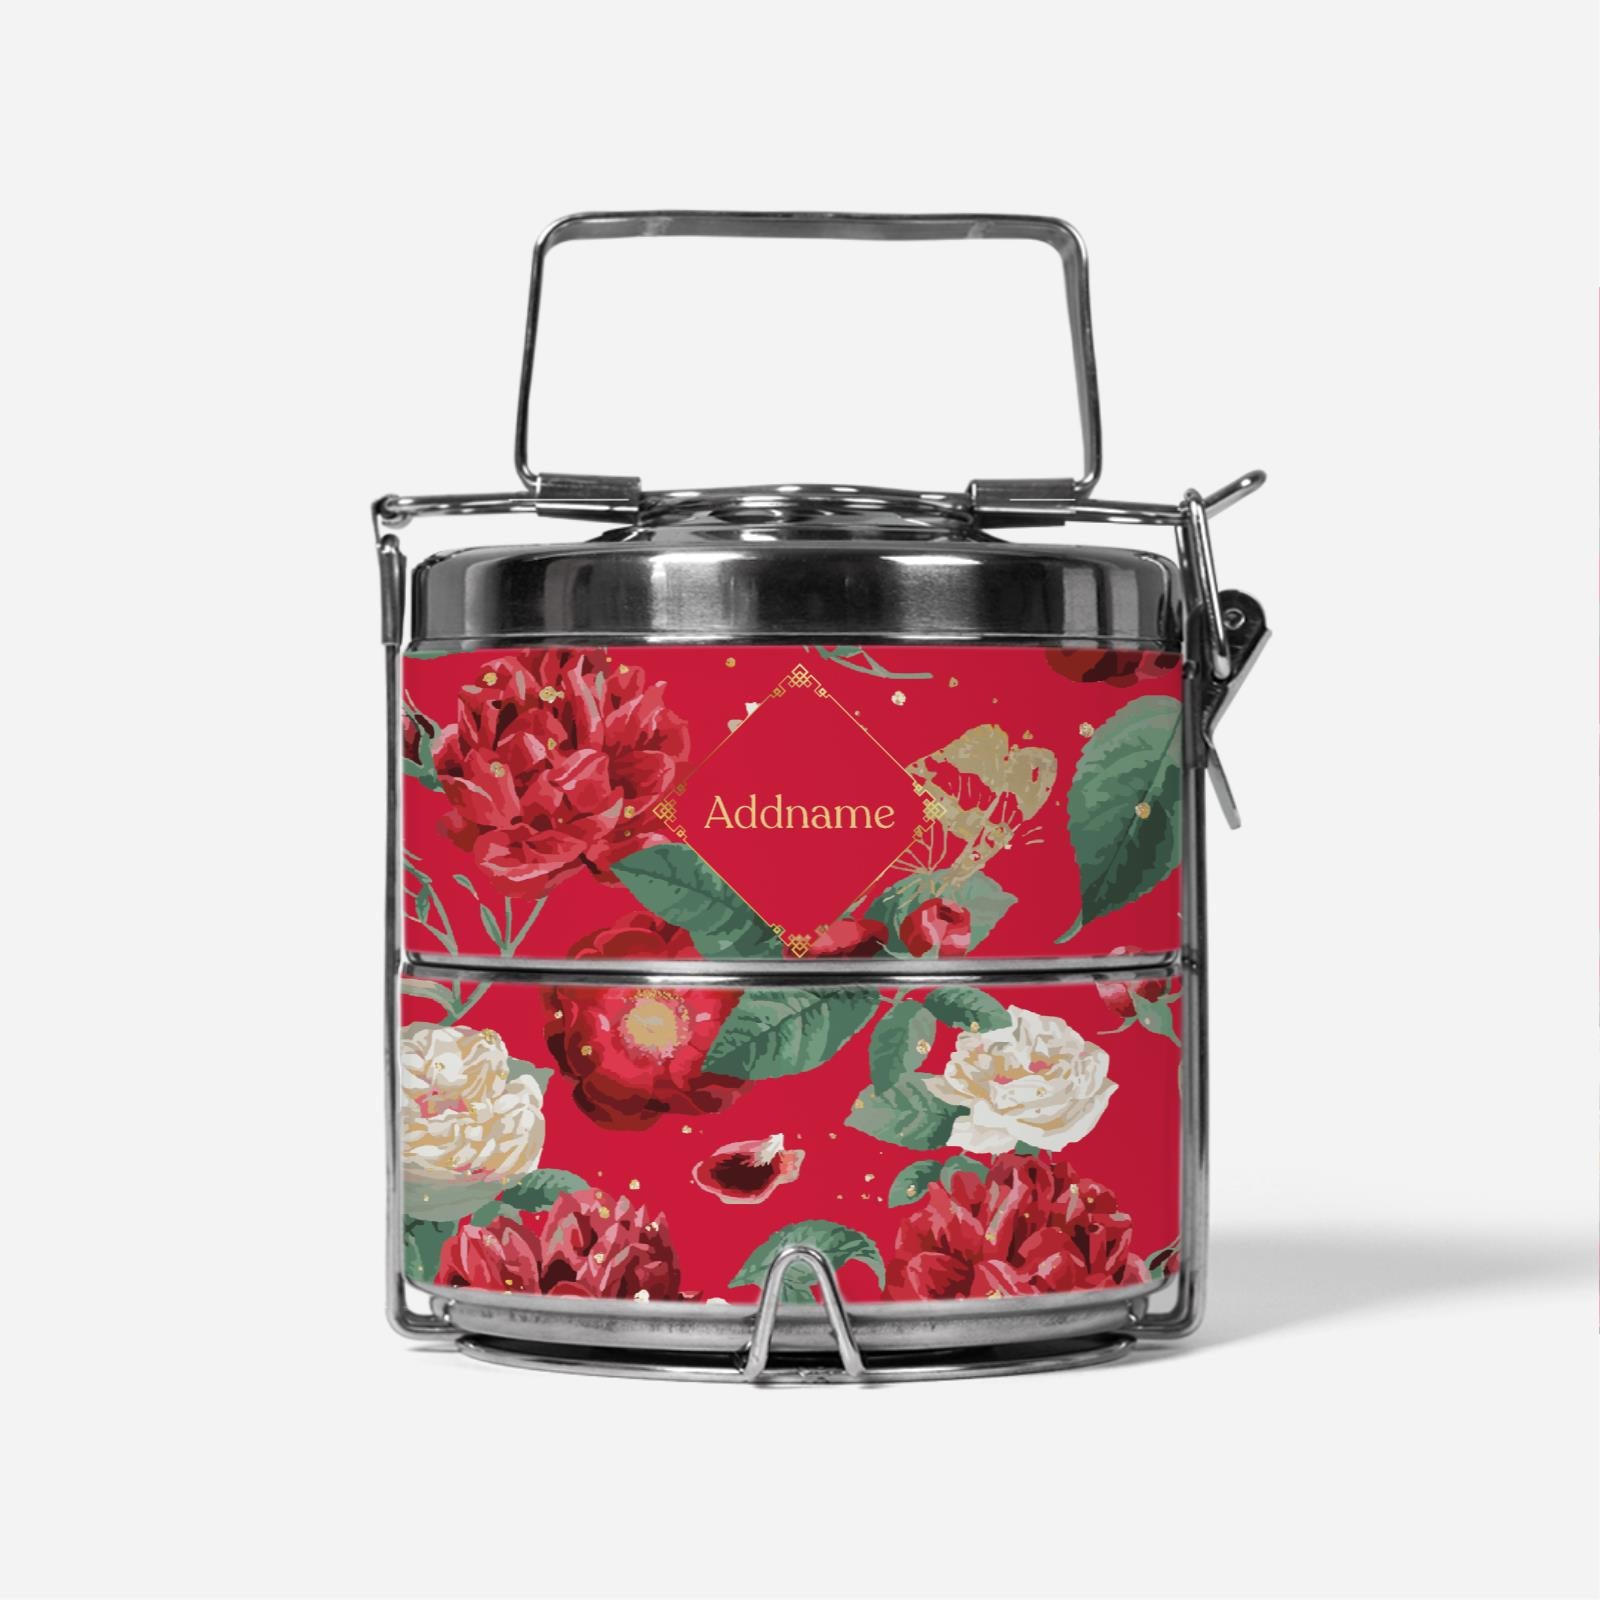 Royal Floral Series With English Personalization Two Tier Premium Tiffin Carrier - Scorching Passion